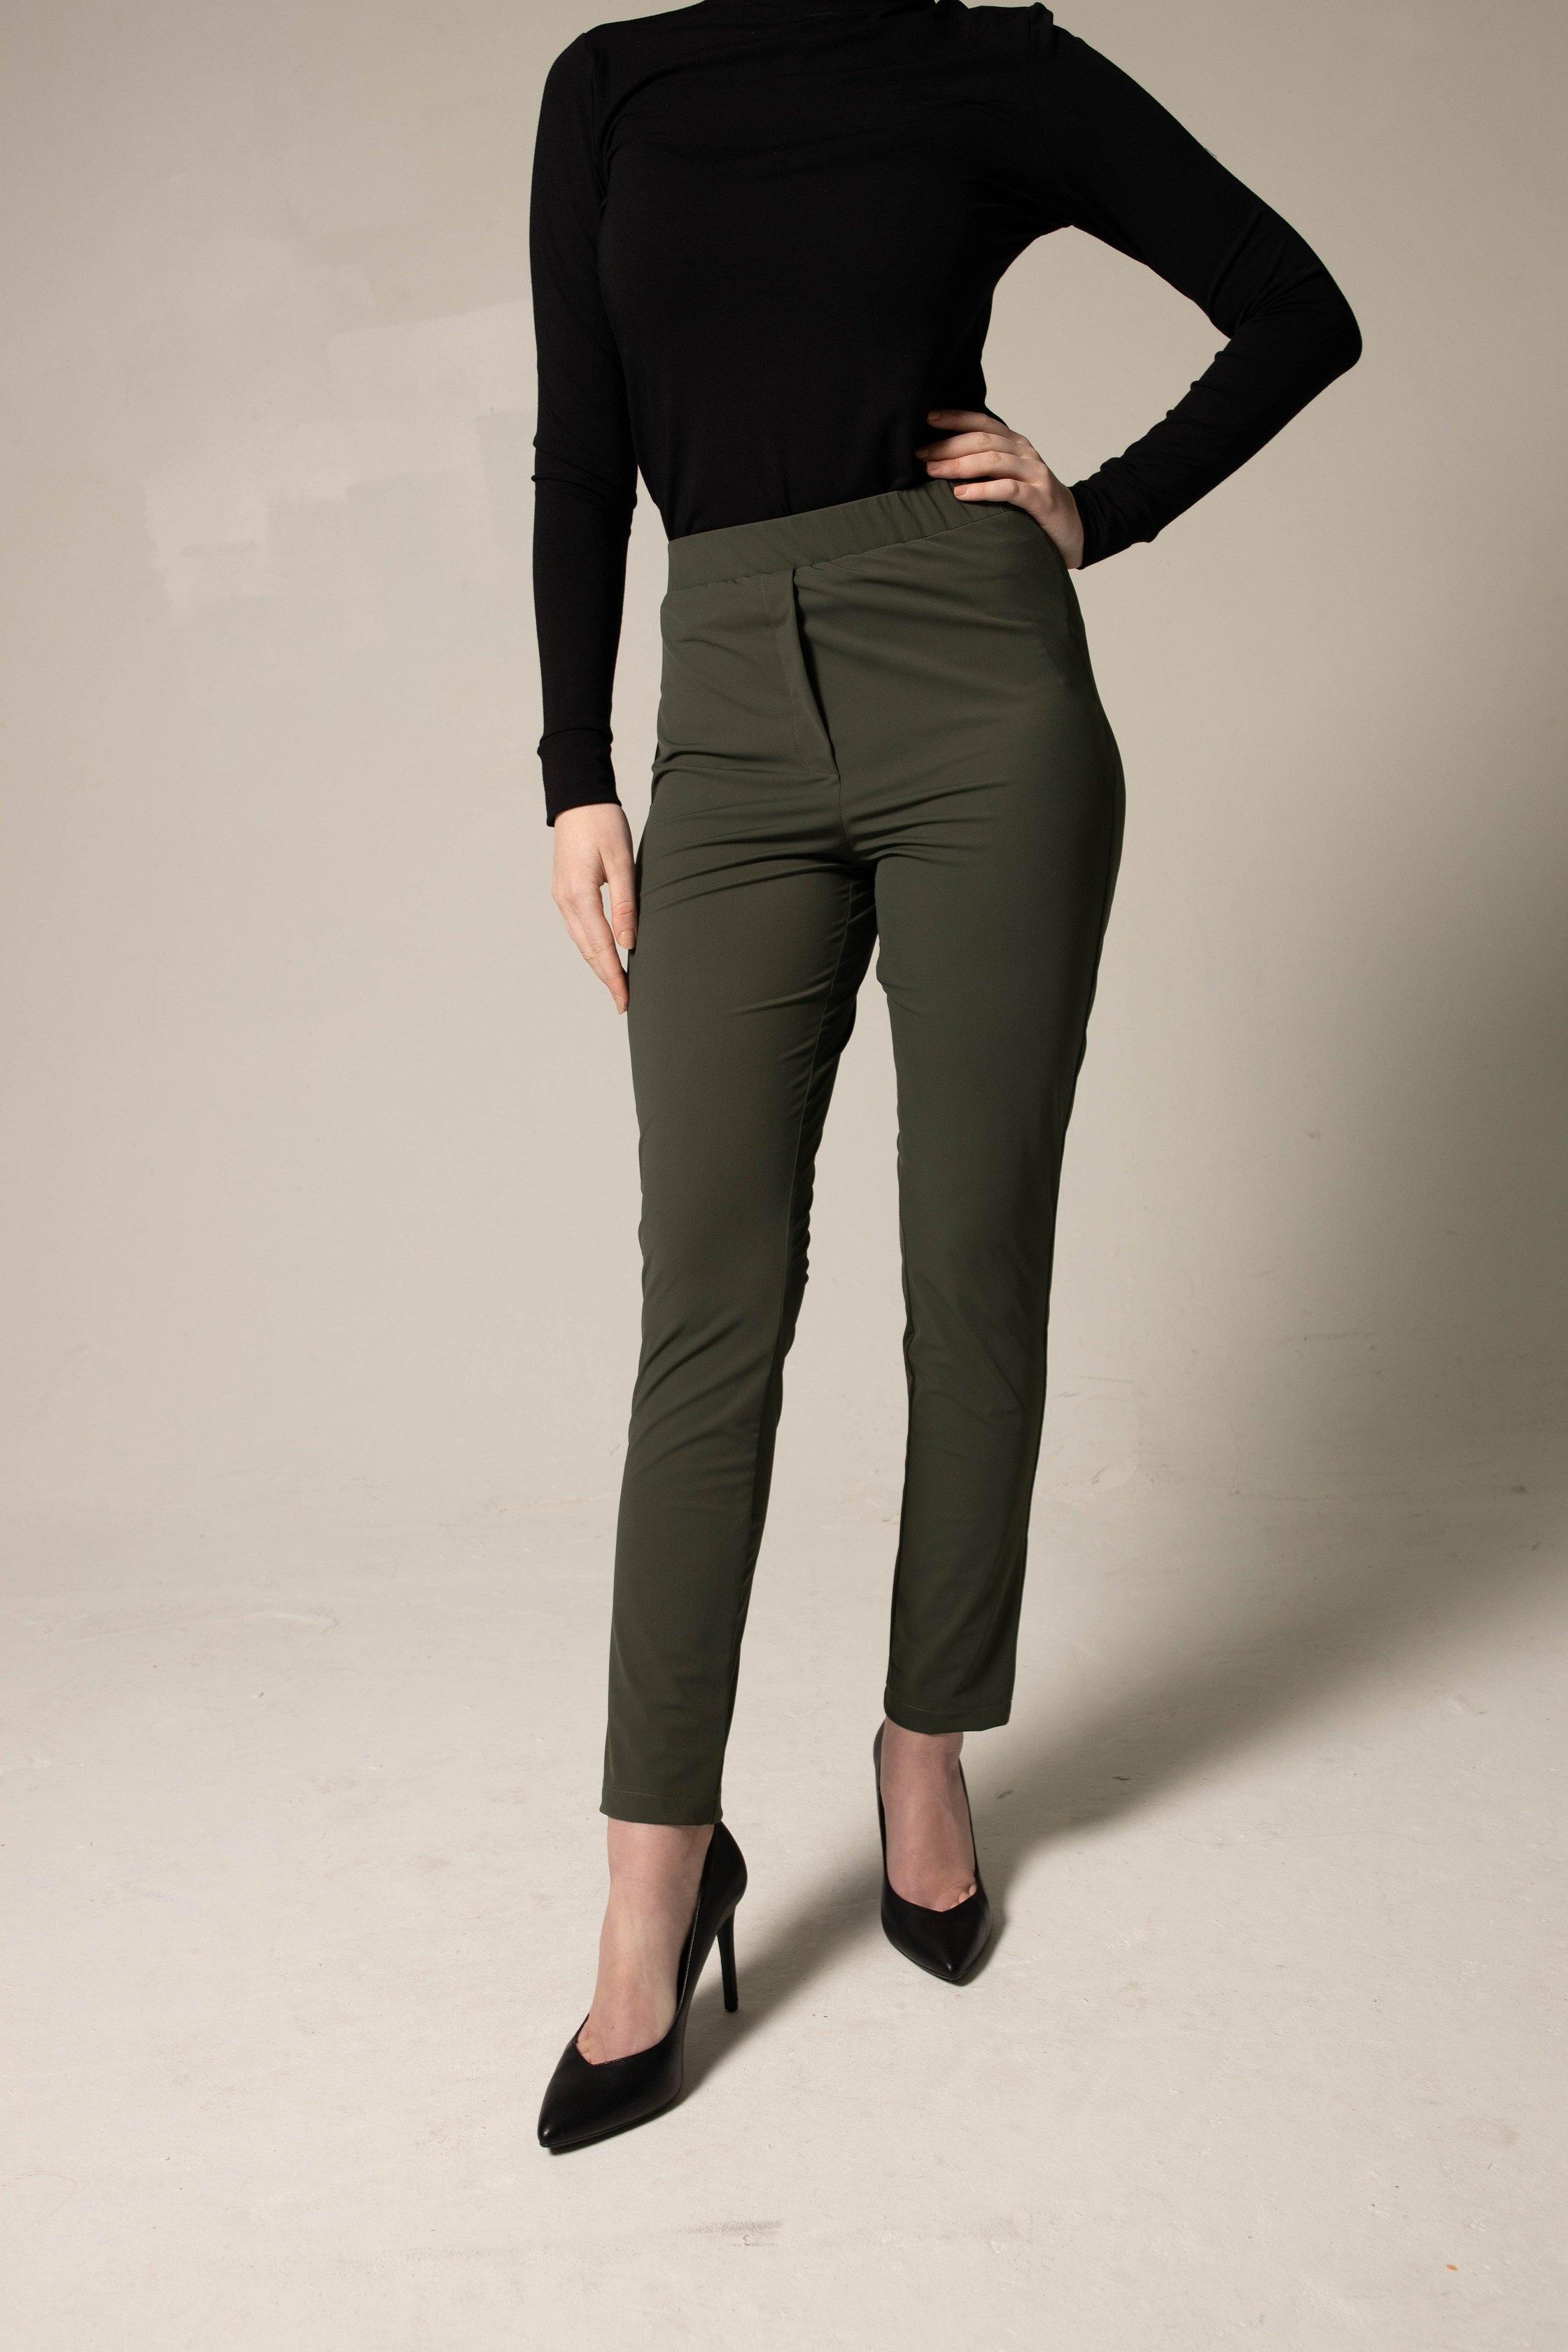 Olive Toned Leghigh Waist Navy Blue Pencil Pants For Women